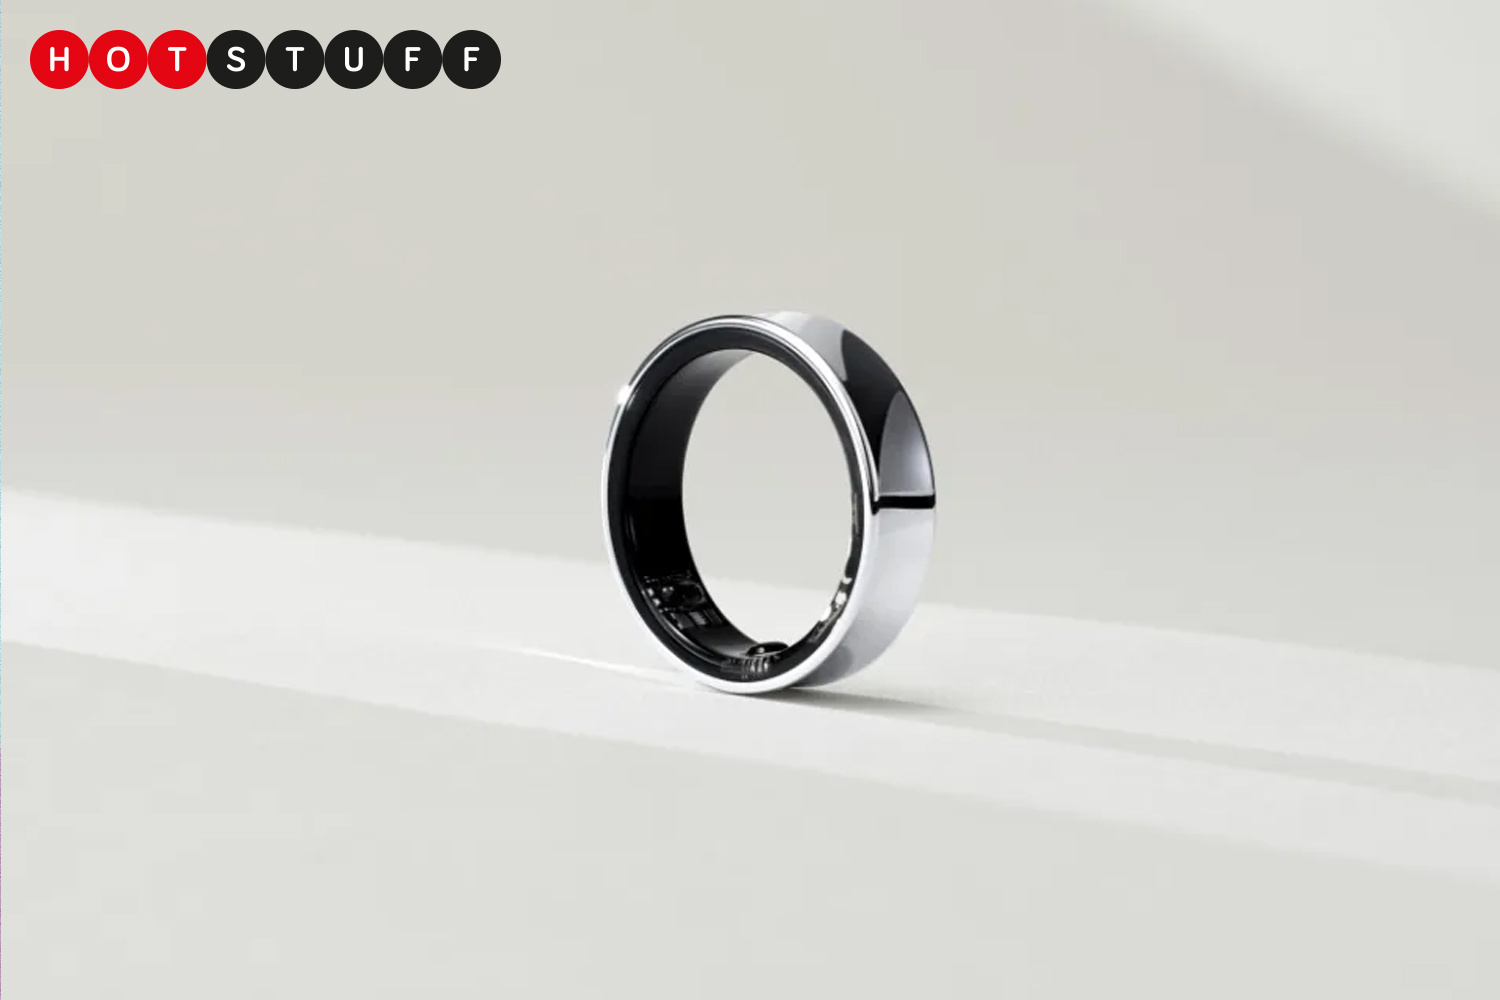 Samsung Galaxy Ring brings health & fitness tracking to your finger